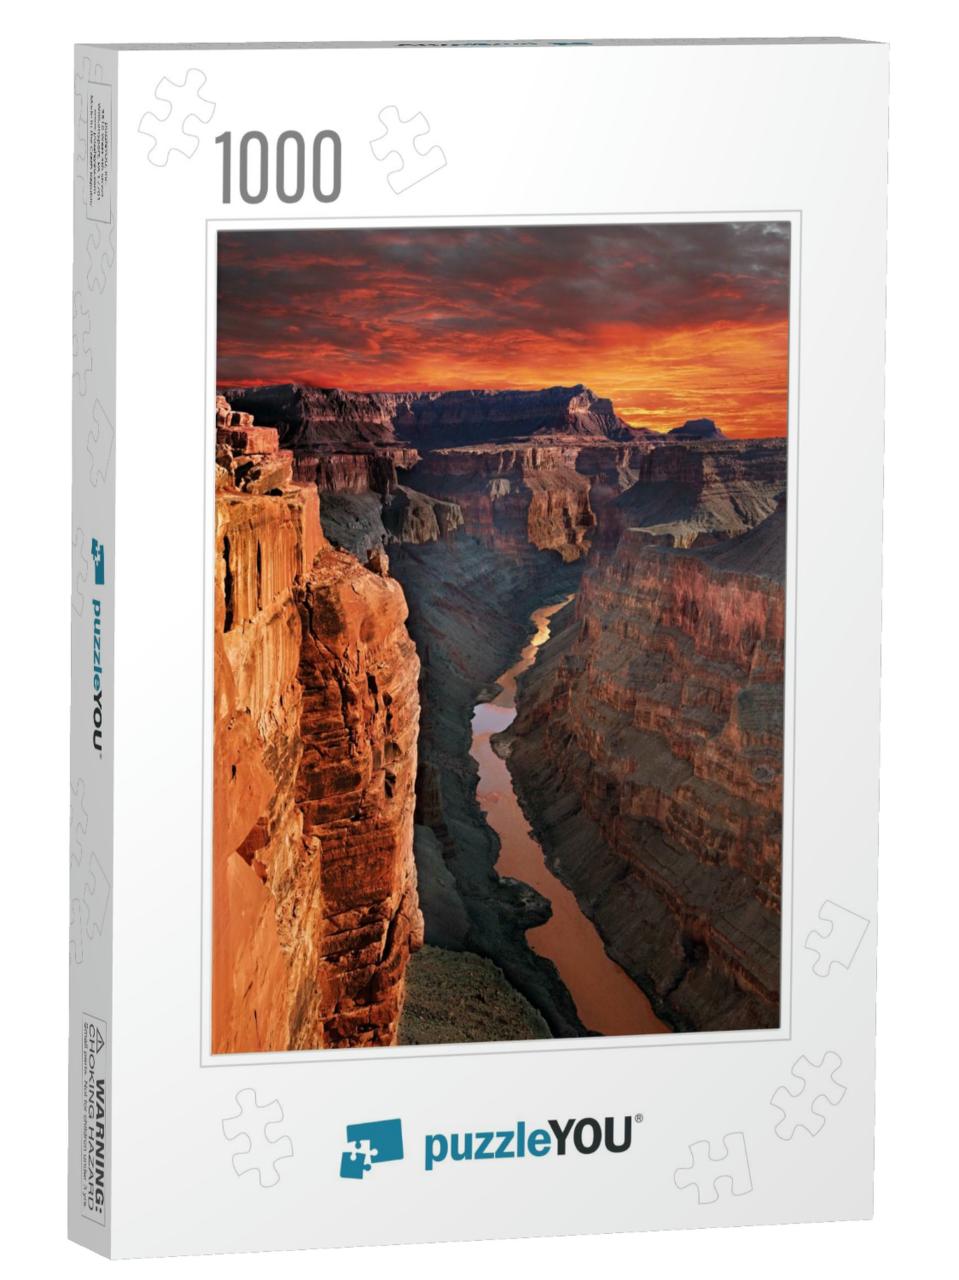 Grand Canyon, Arizona. the Grand Canyon is a Steep-Sided... Jigsaw Puzzle with 1000 pieces